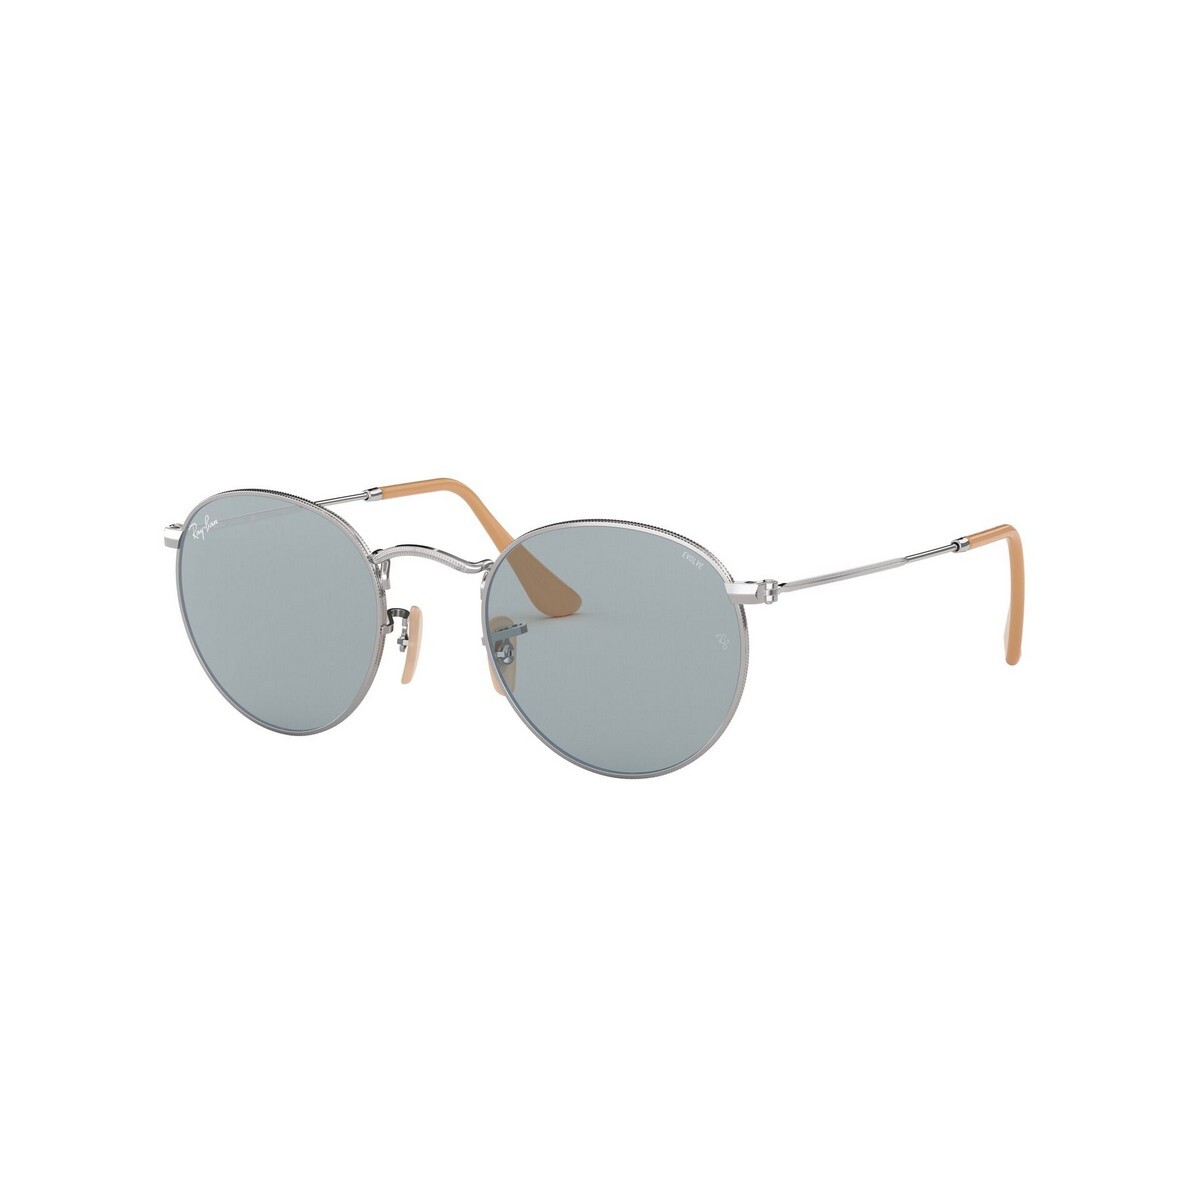 Ray-Ban Mens Frame With  Photo Blue Lens Sunglass